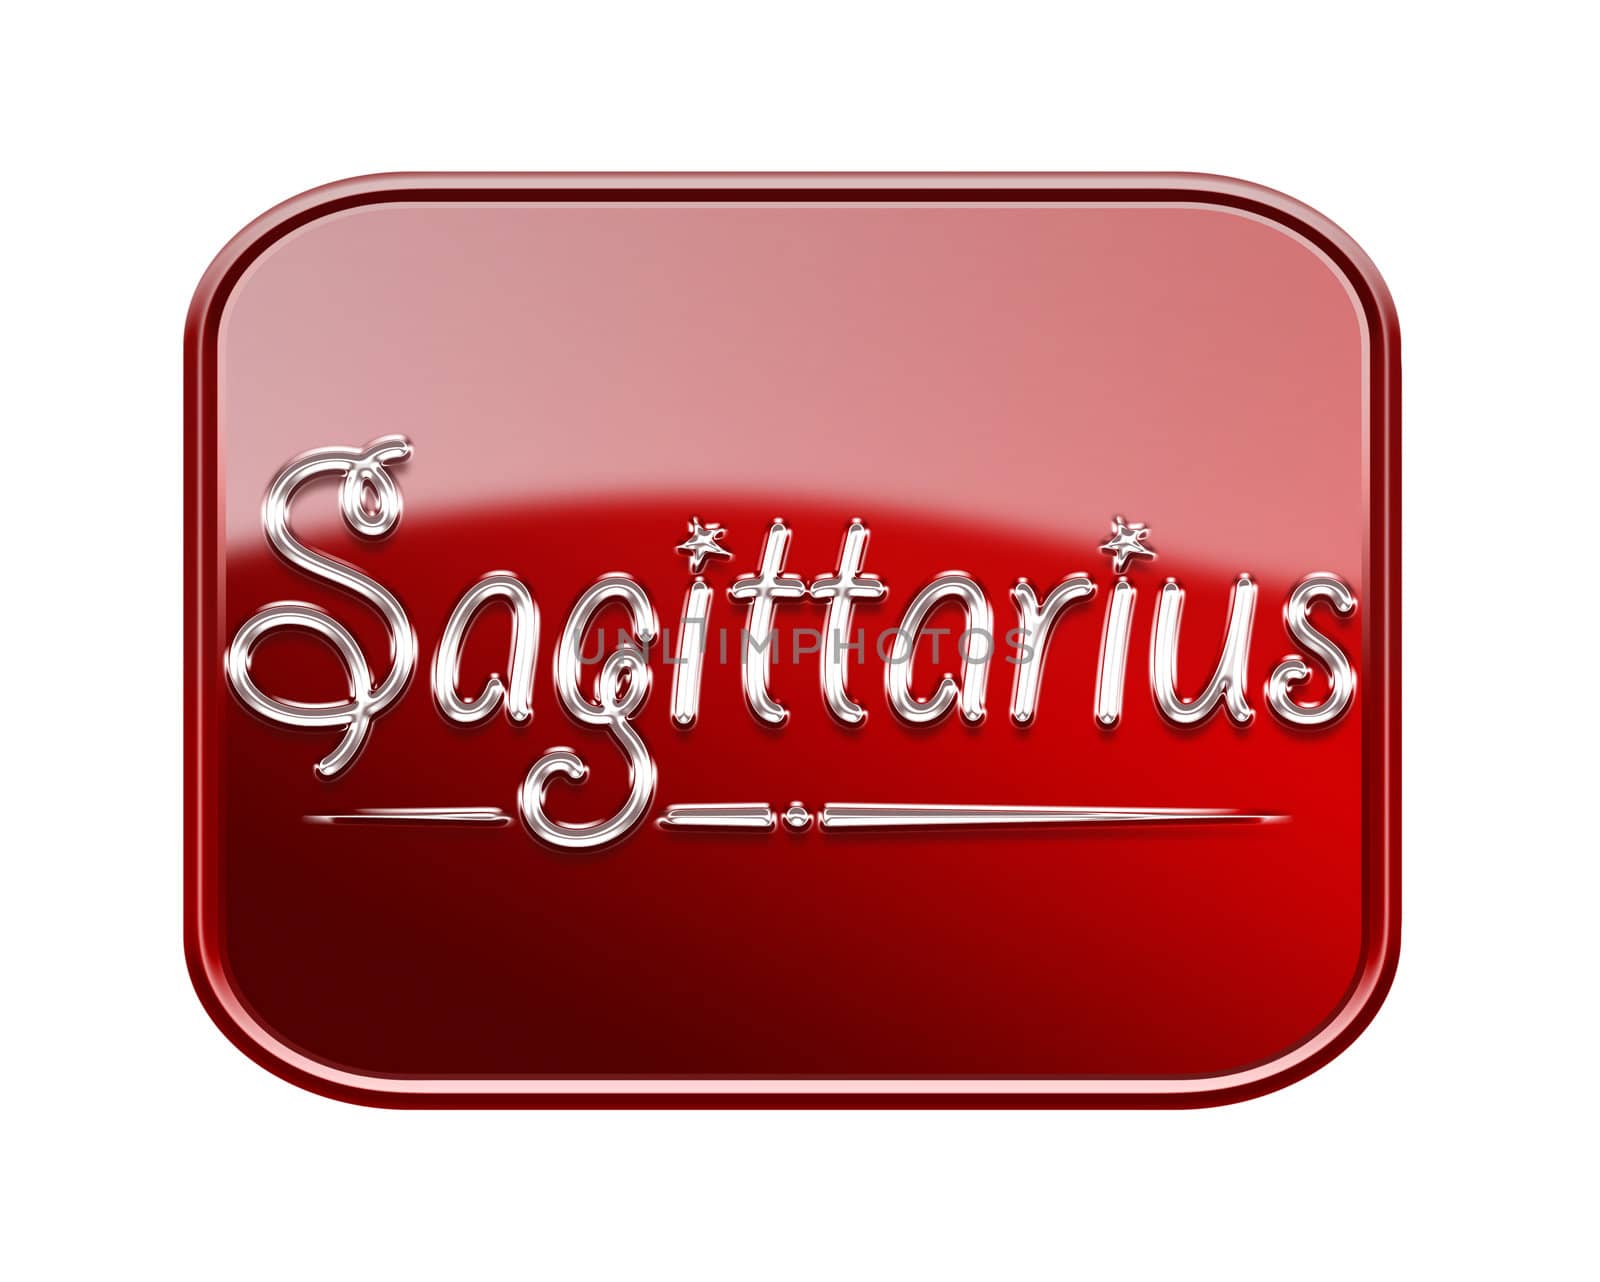 Sagittarius zodiac icon red glossy, isolated on white background